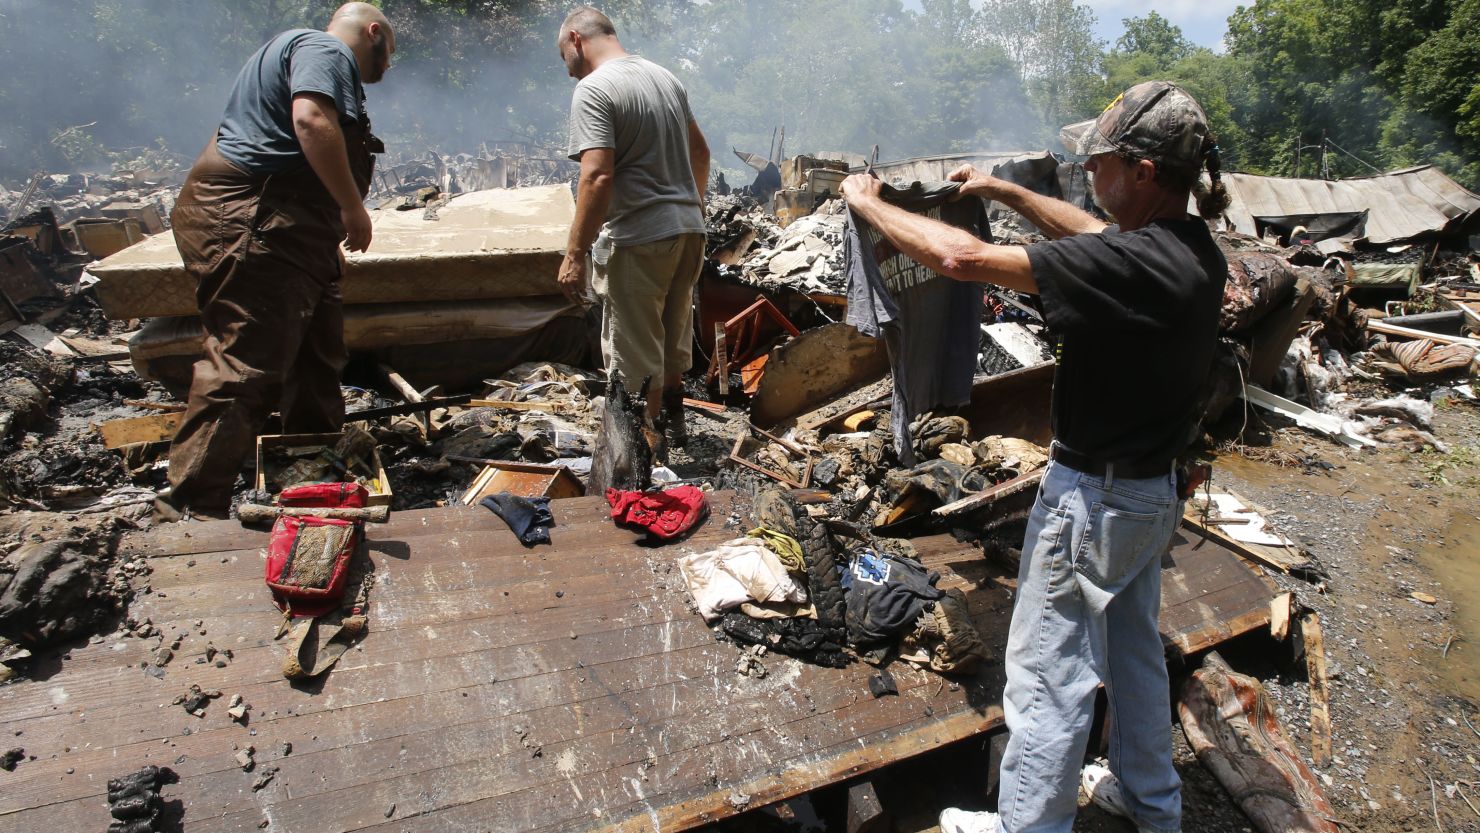 Men go through the debris of a home that washed away and burned after severe flooding hit White Sulphur Springs, West Virginia.